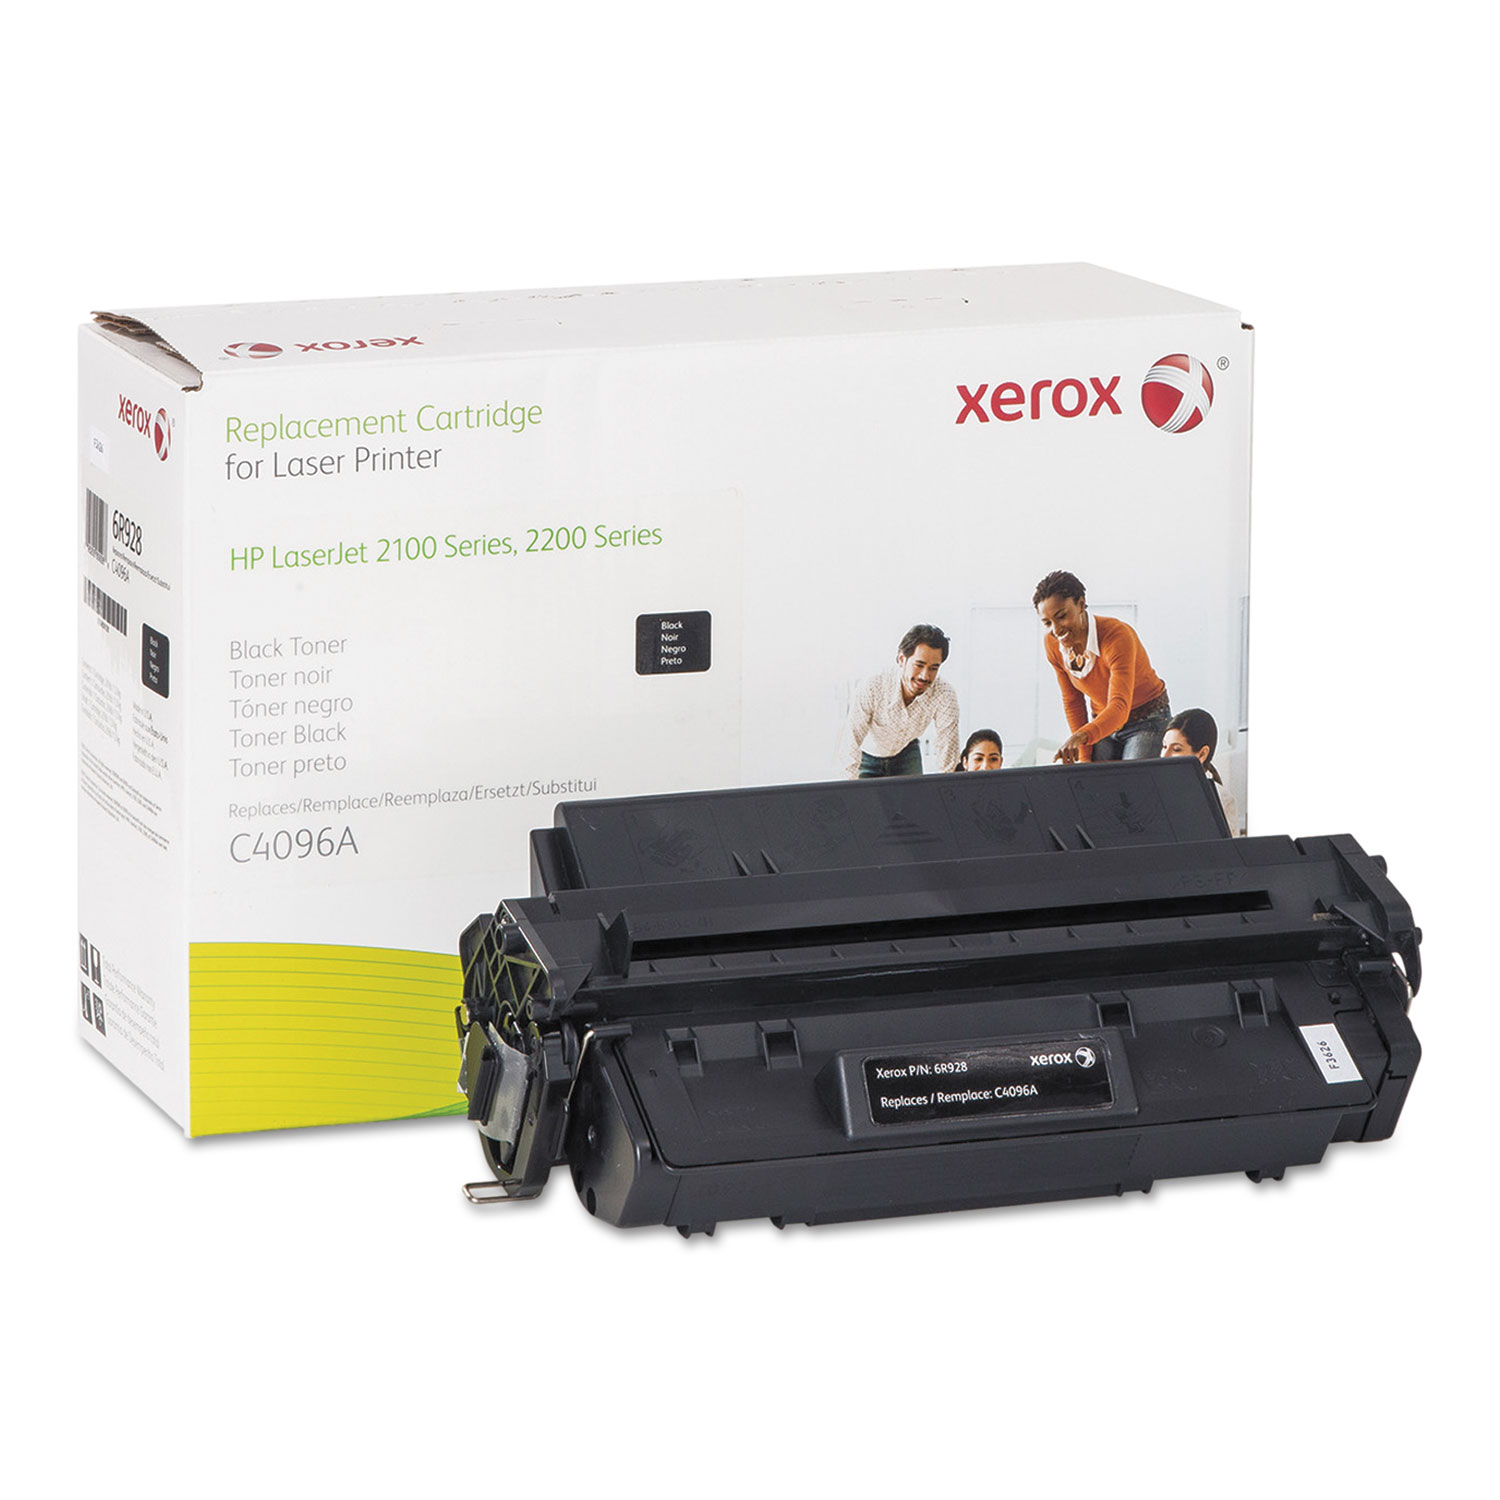  Xerox 006R00928 006R00928 Replacement Toner for C4096A (96A), Black (XER006R00928) 